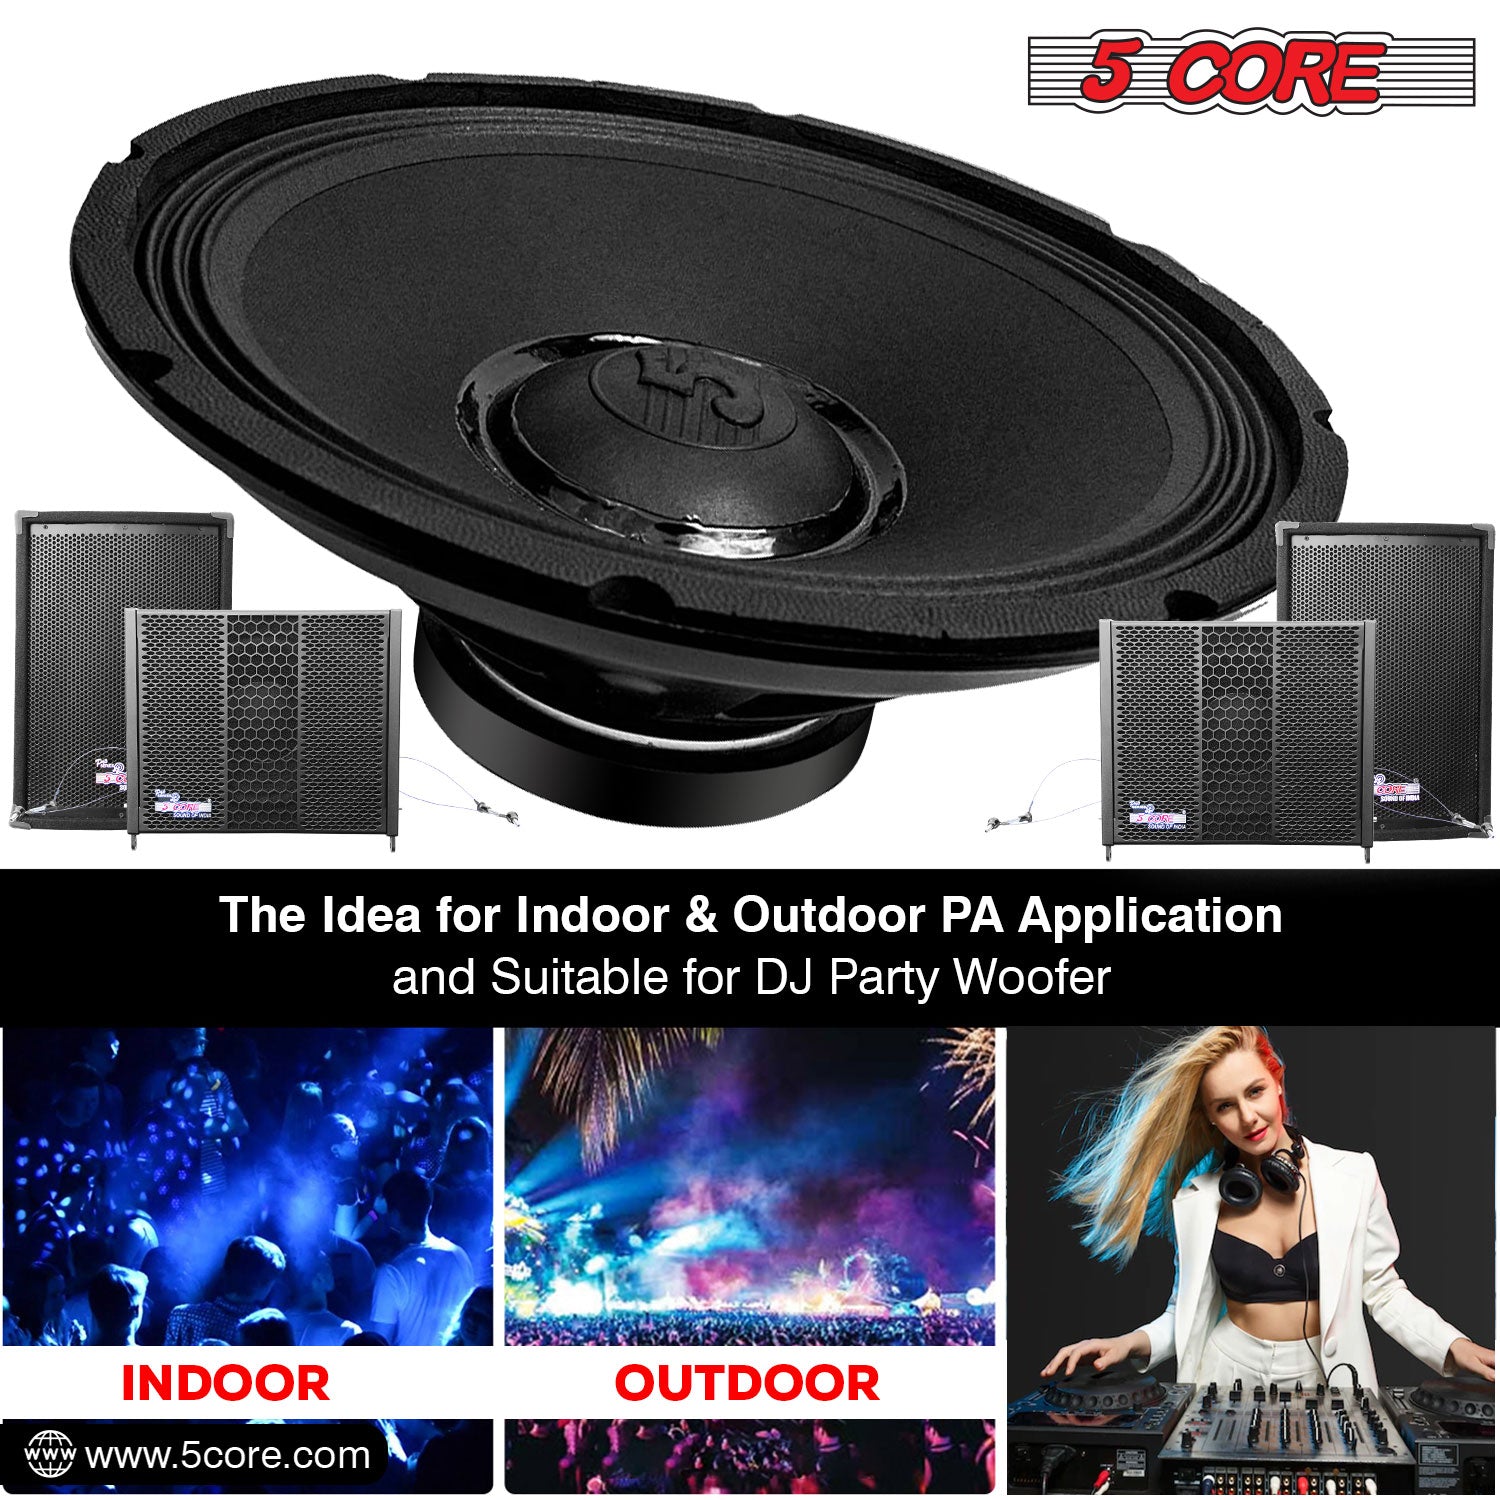 5 core 15 inch subwoofer ideal for indoor and outdoor pa application and suitable for dj party woofer.